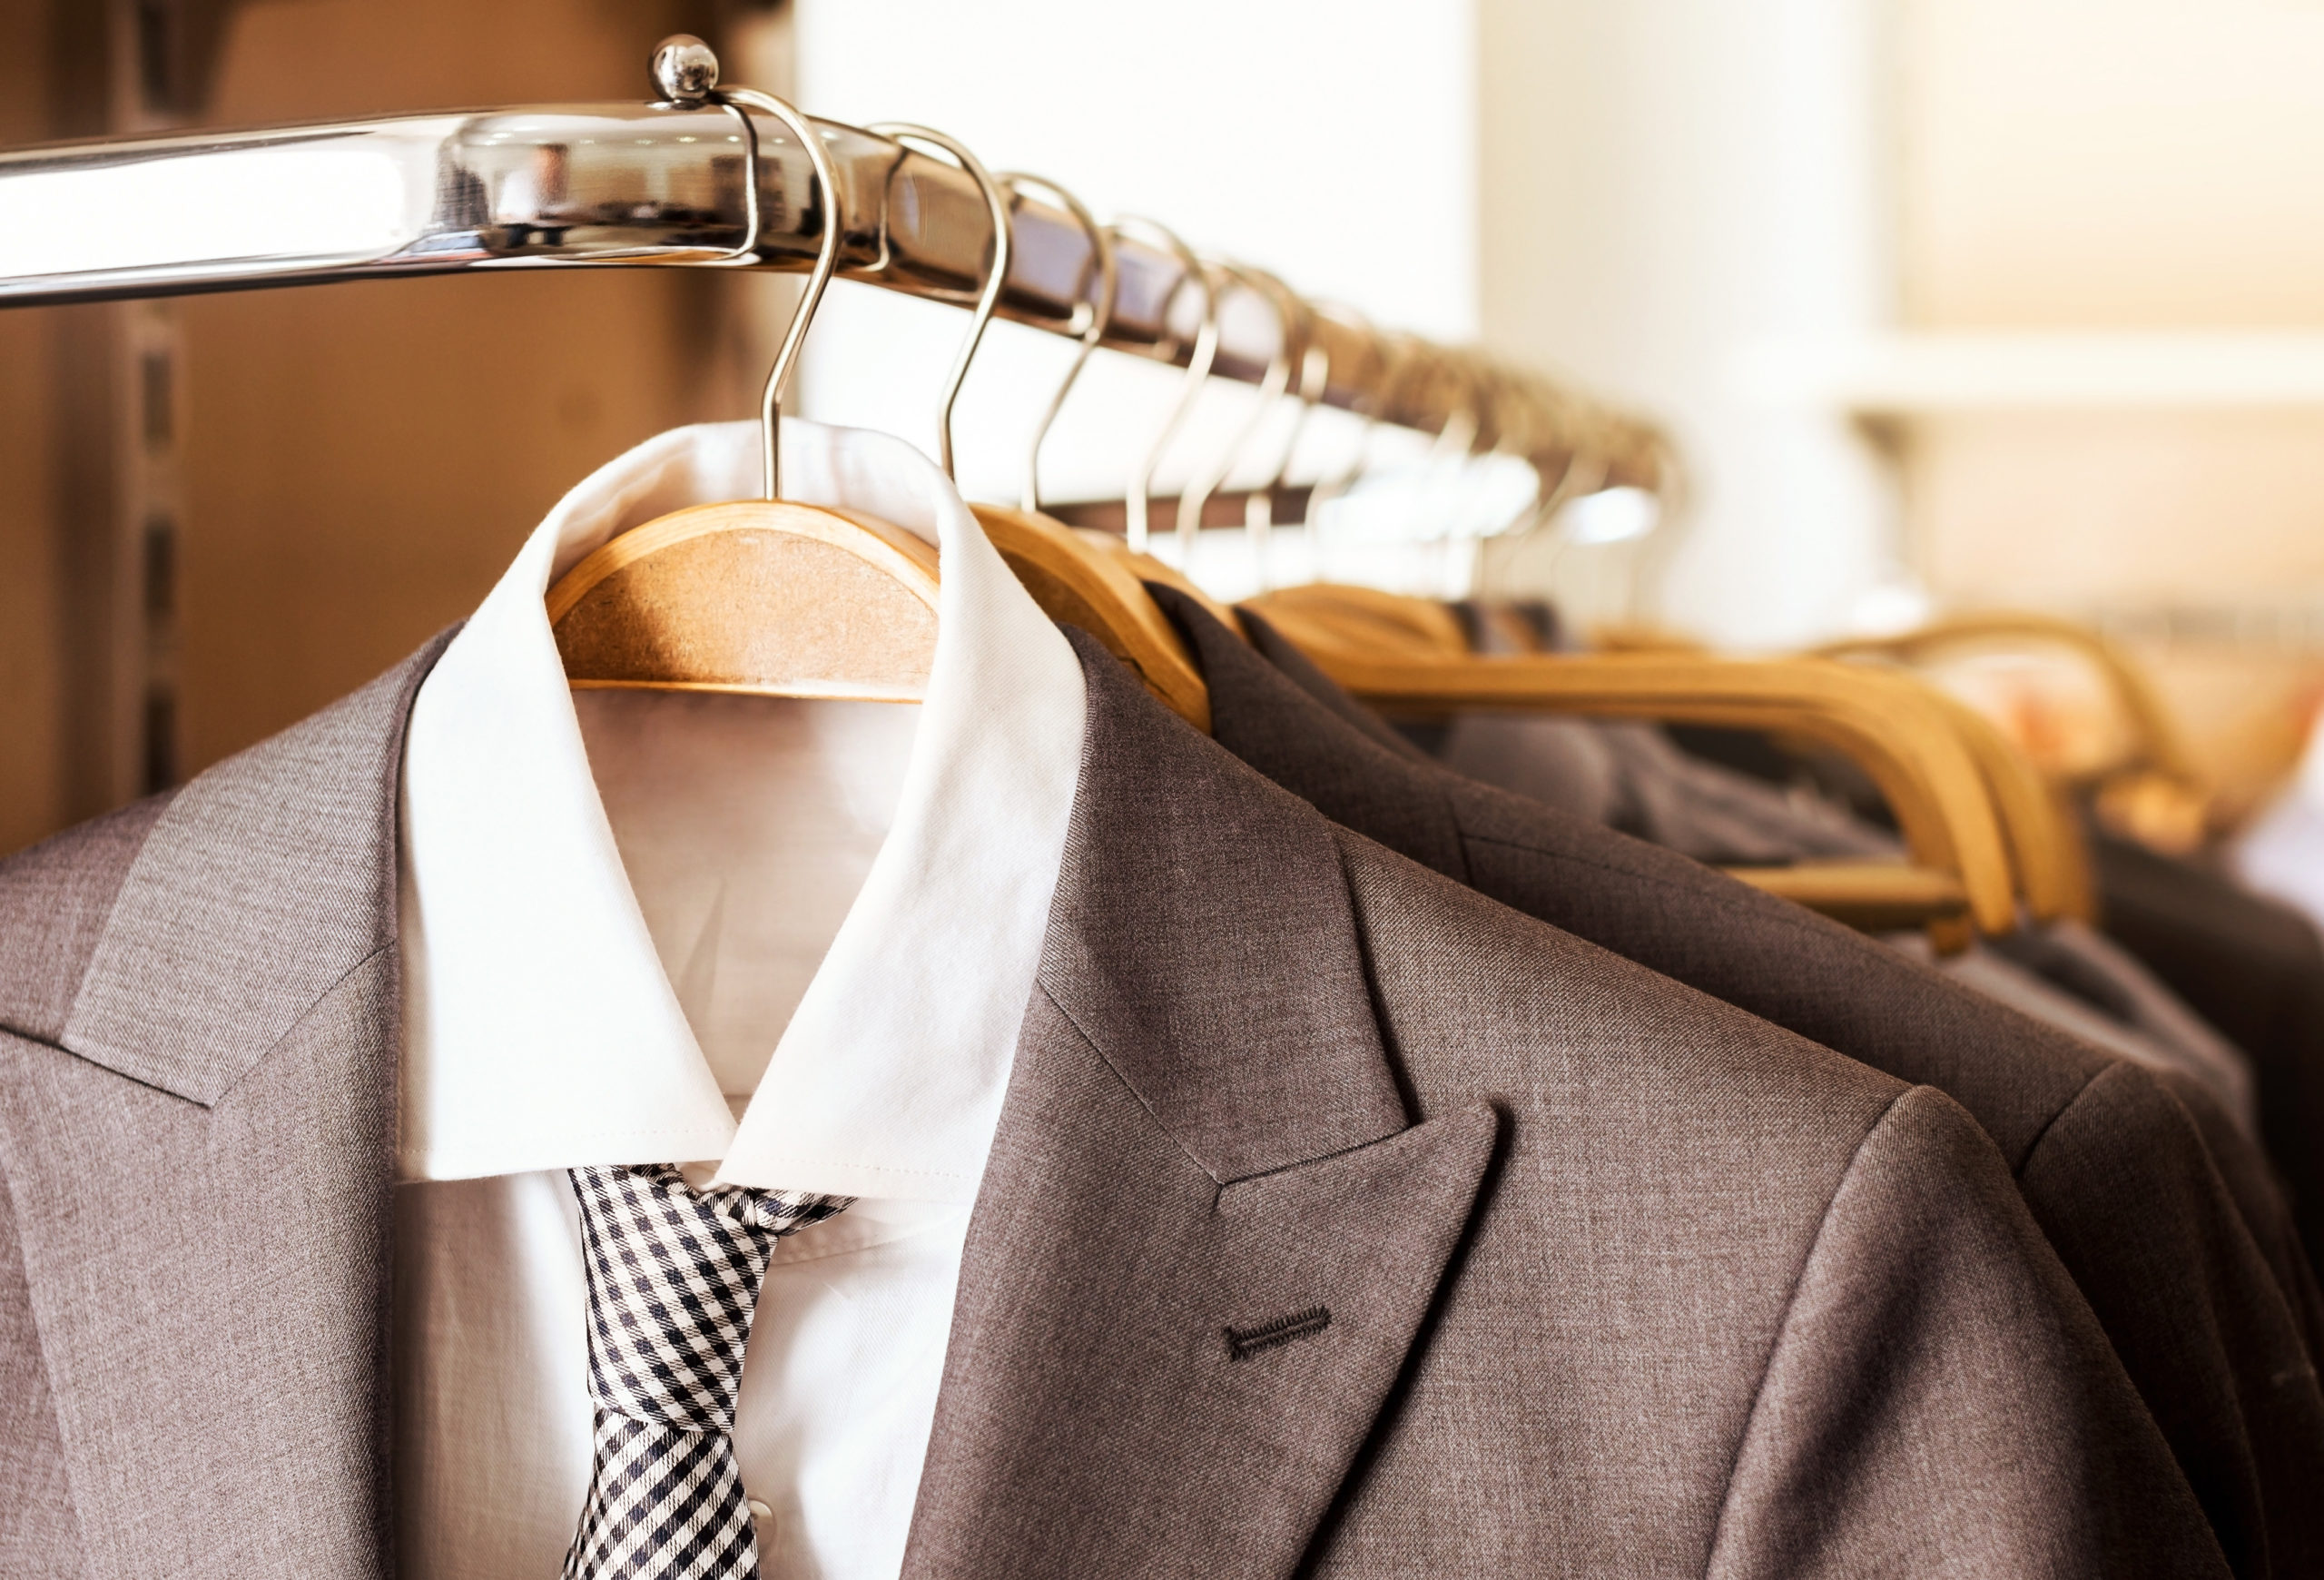 Mens suits and formal shirts on wooden hangers in a clothes store